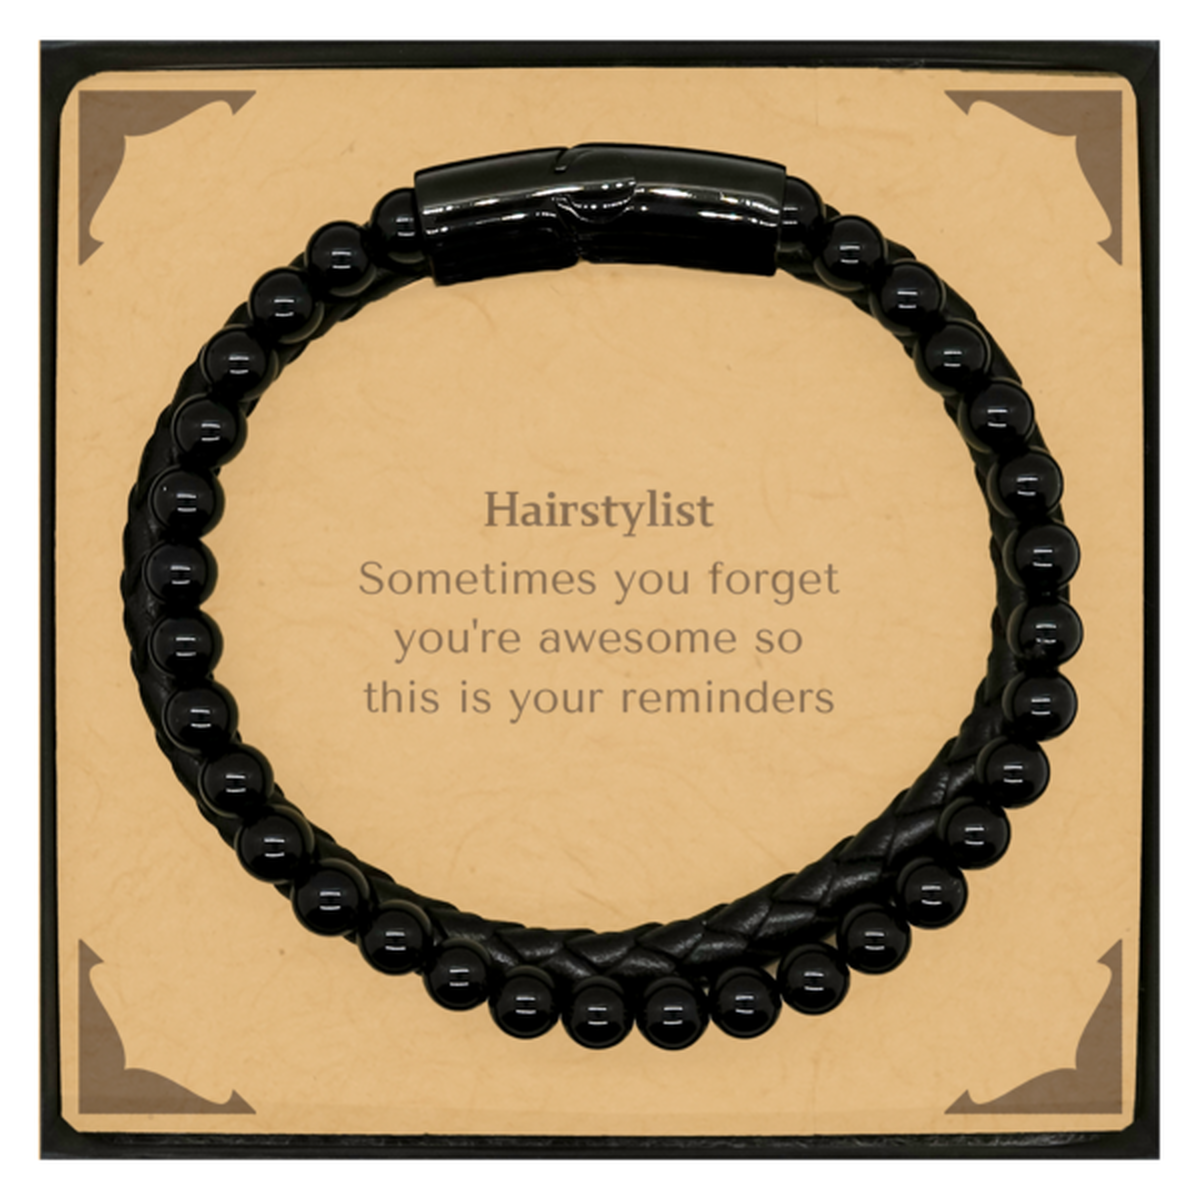 Sentimental Hairstylist Stone Leather Bracelets, Hairstylist Sometimes you forget you're awesome so this is your reminders, Graduation Christmas Birthday Gifts for Hairstylist, Men, Women, Coworkers